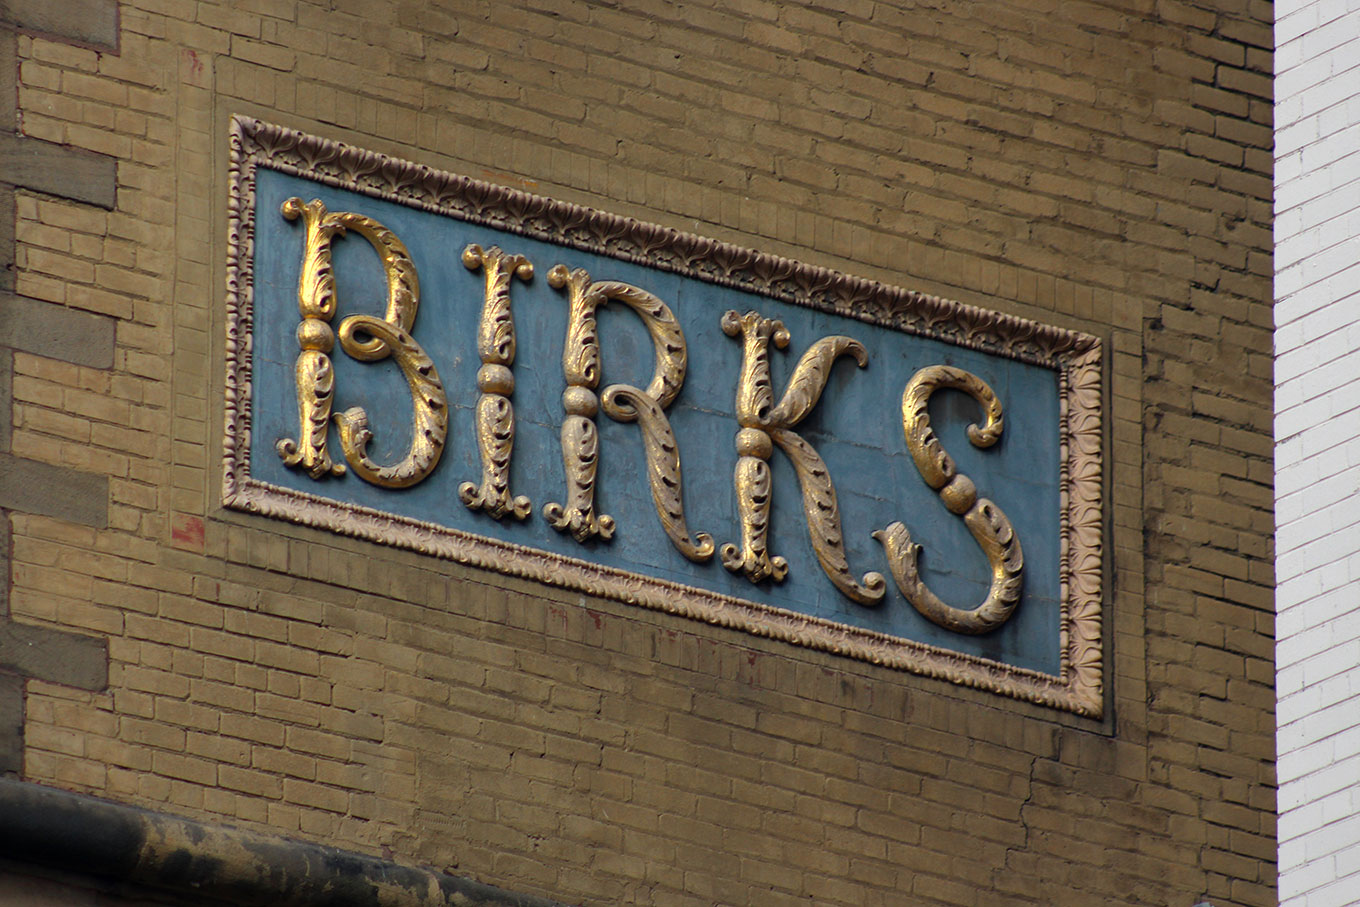 Enormous expressive letters on the side of the Birks Building on Phillips Square.